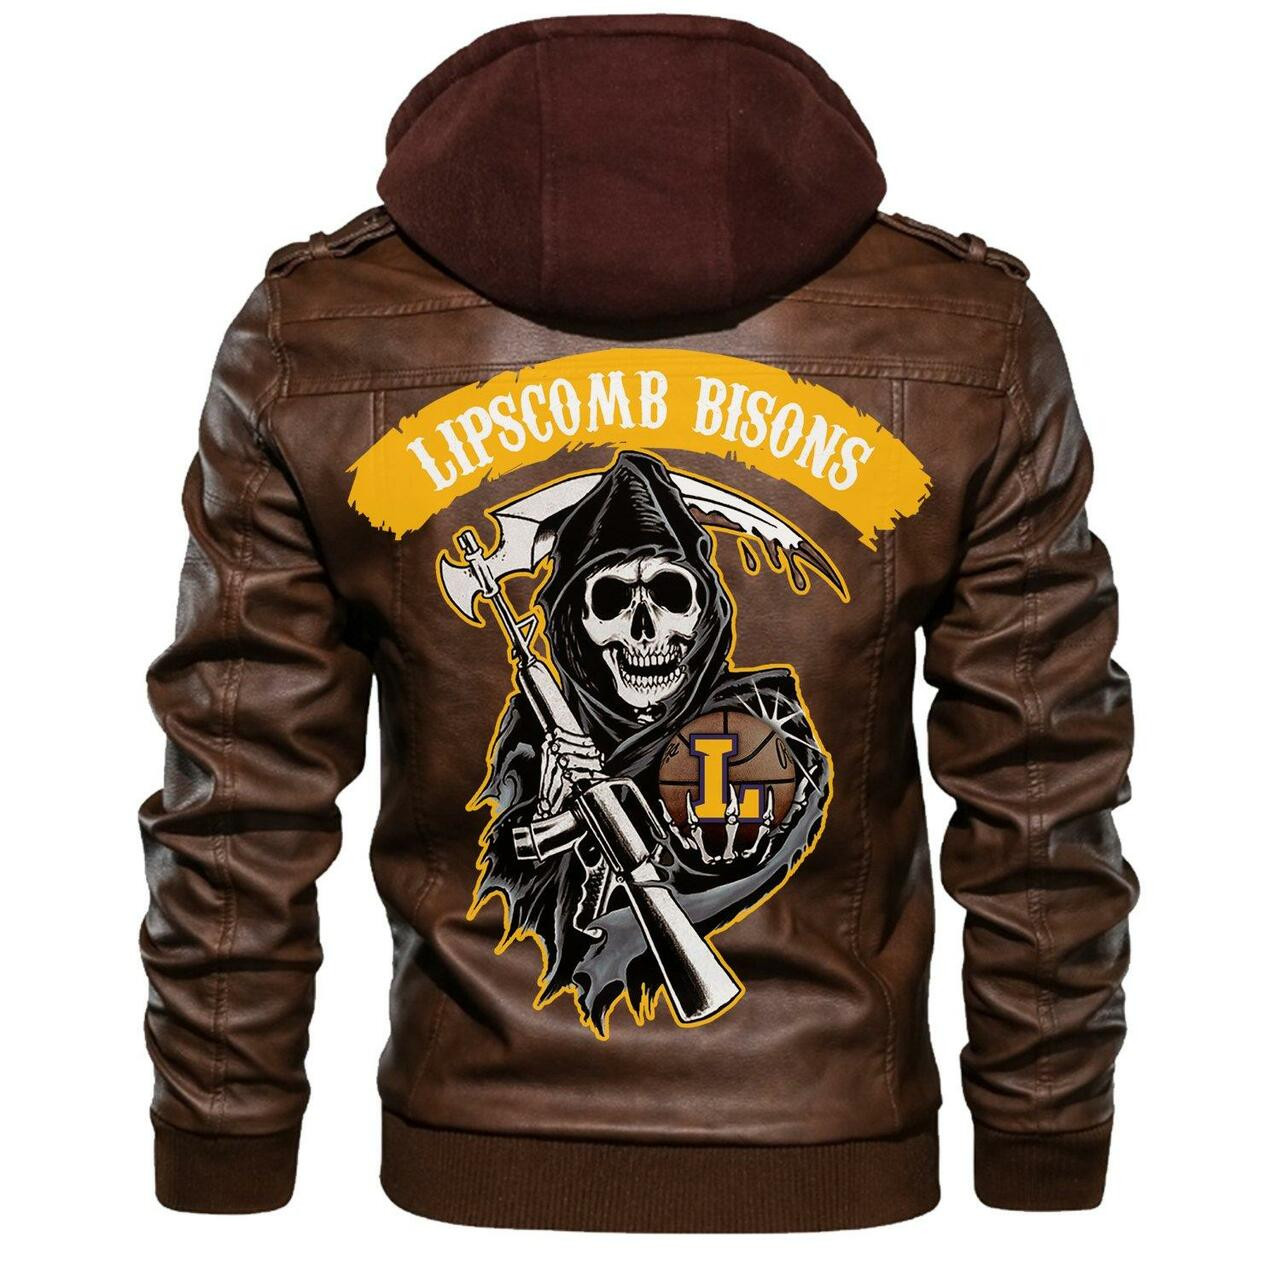 You'll get the best Leather Jacket by shopping online 72